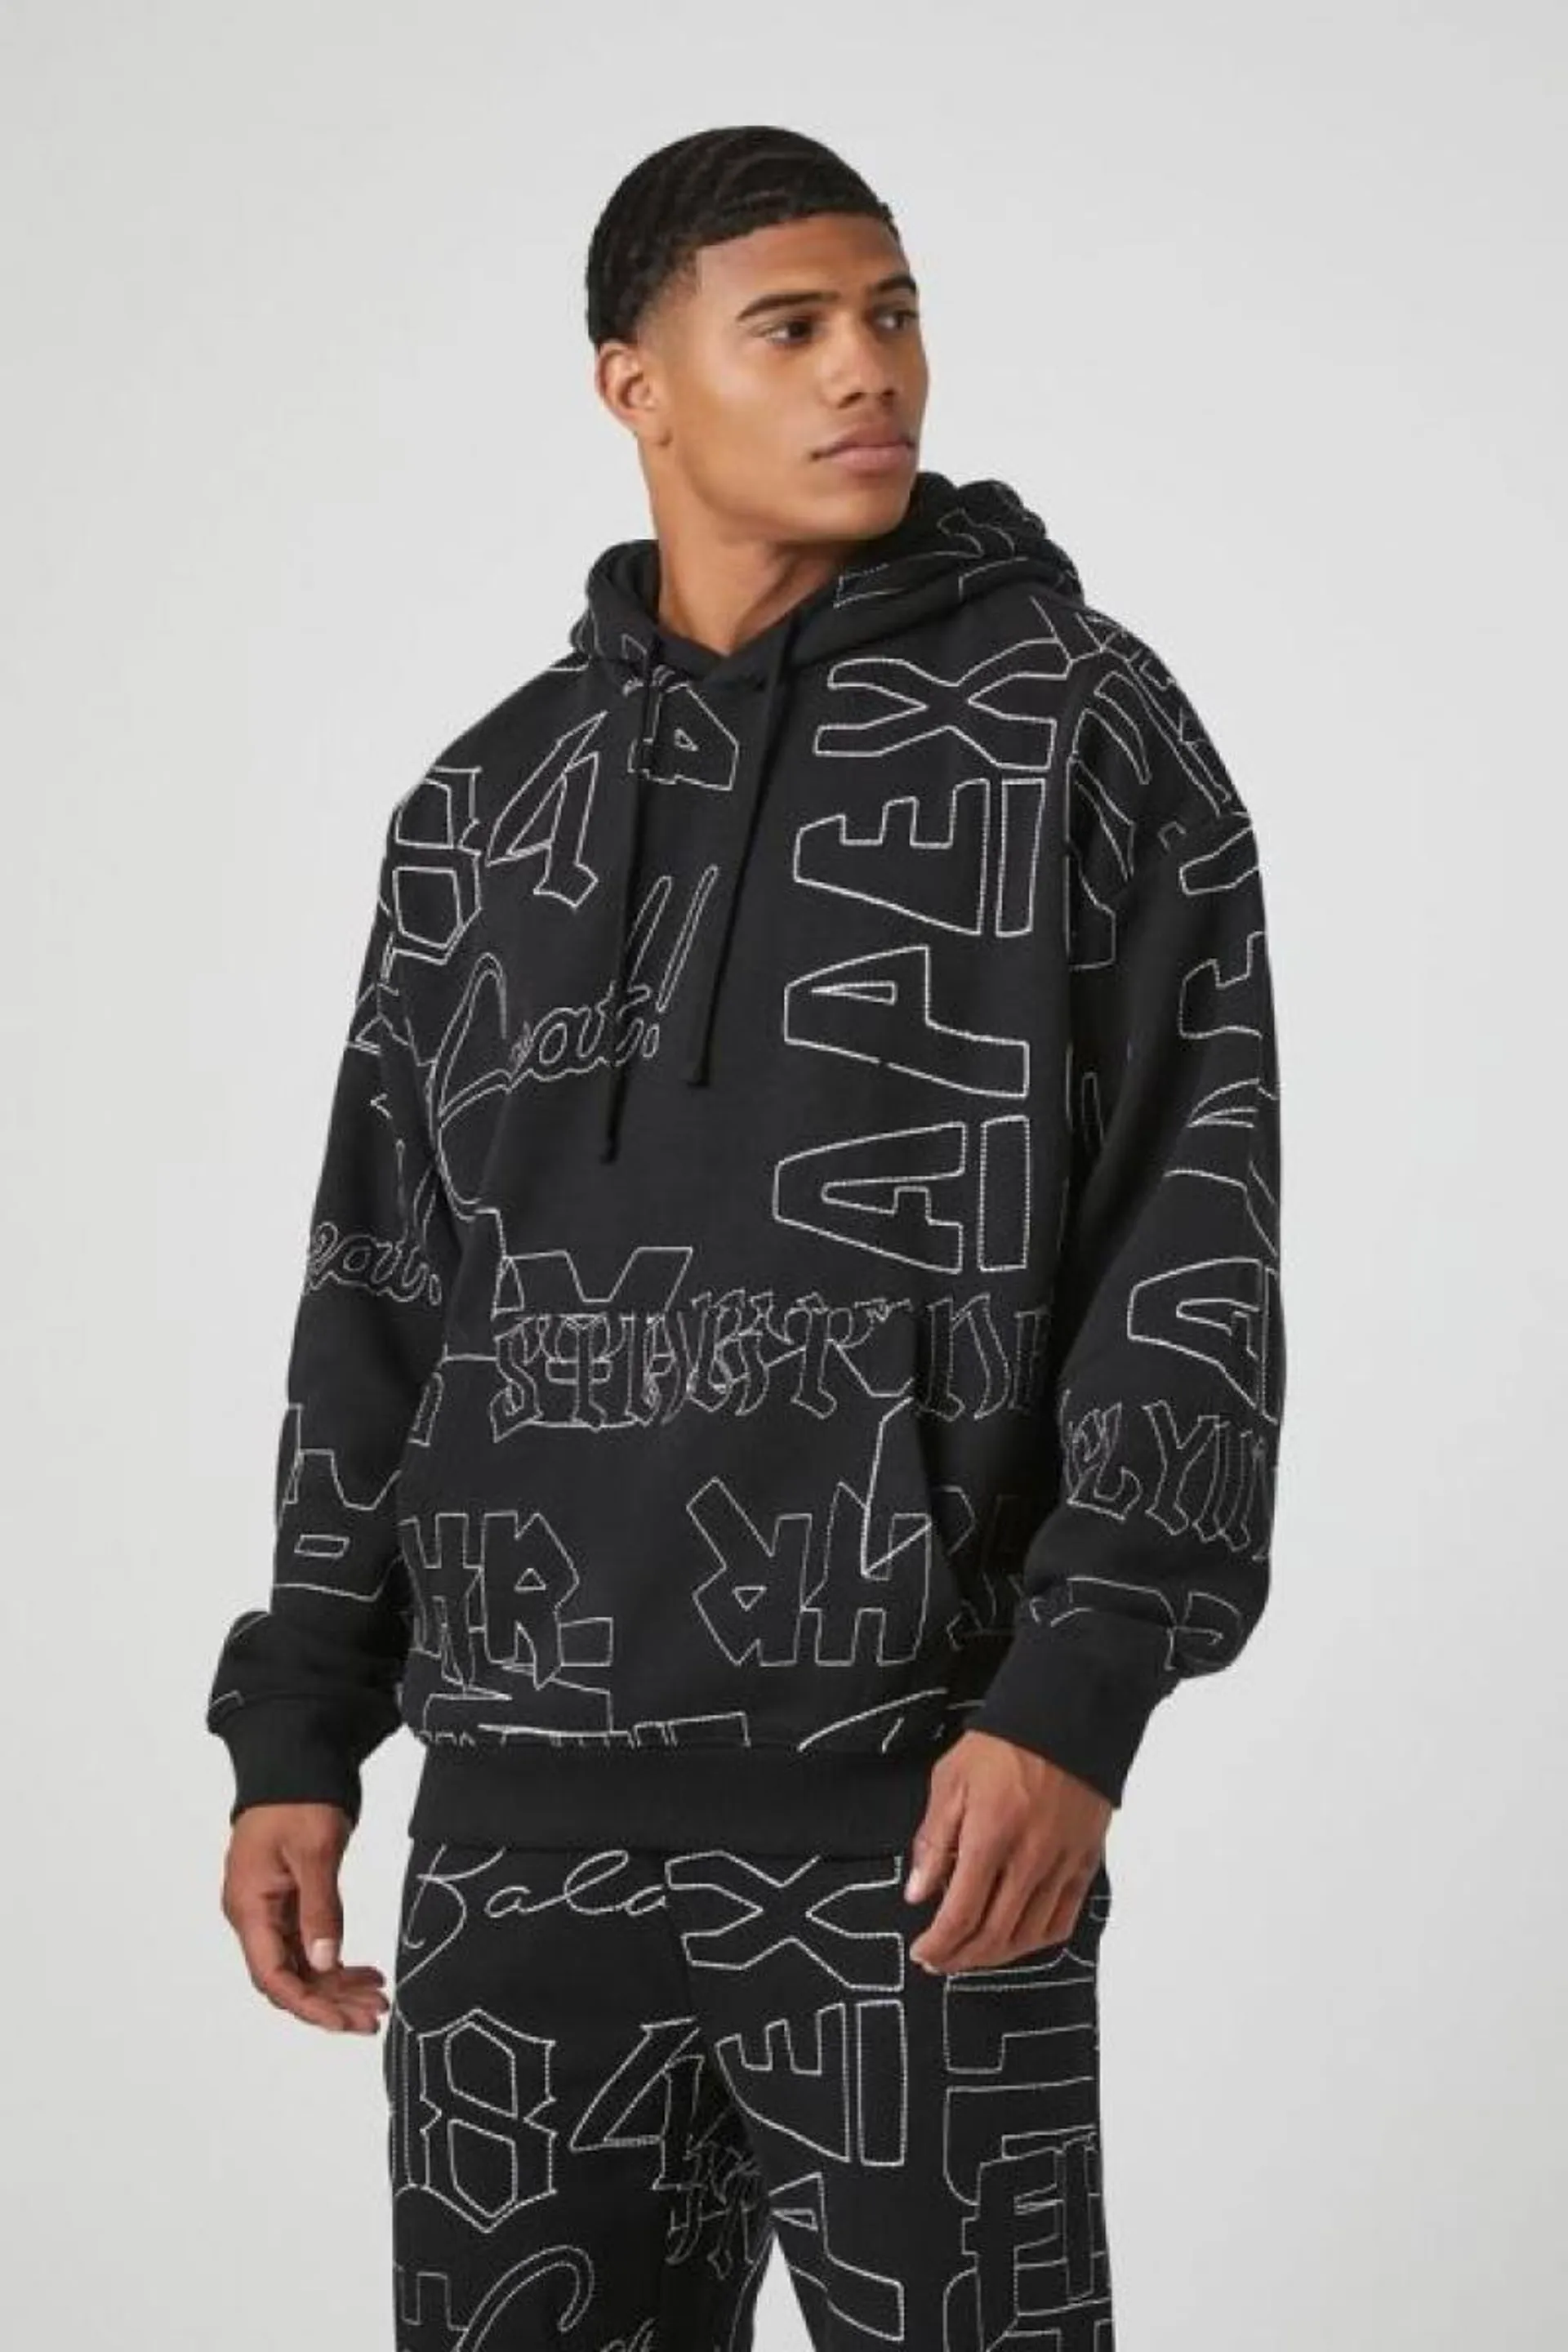 Sudaderas Forever 21 Stitched Embroidered Hombre Negras Creme | gYNPvAoIASr